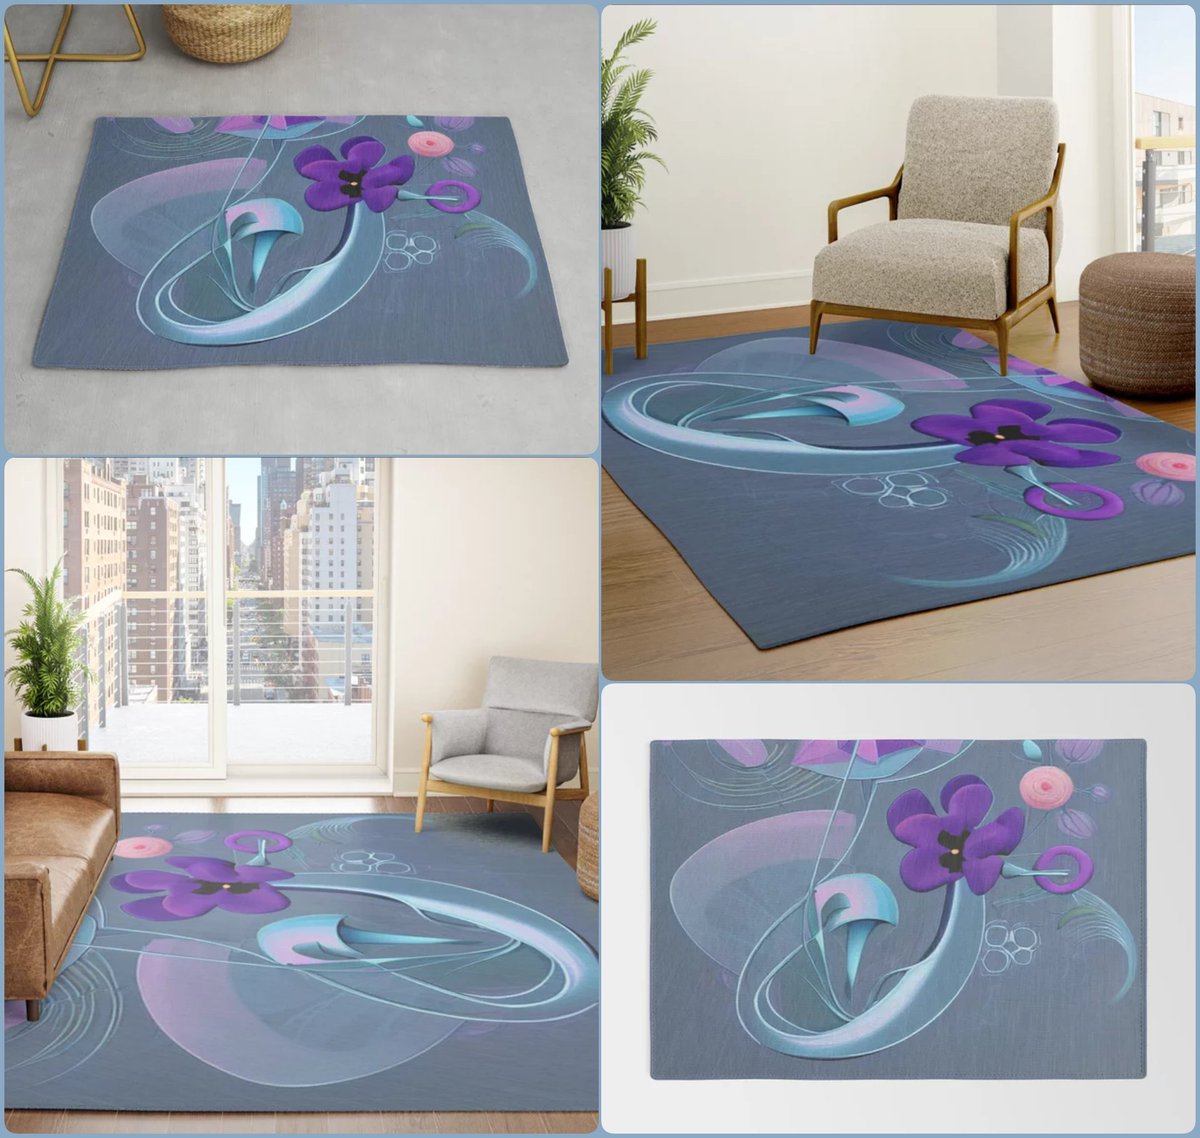 Unique Pathways Rug~by Art_Falaxy~
~Refreshingly Unique~
#artfalaxy #art #rugs #mats #homedecor #society6 #Society6max #swirls #modern #trendy #accents #floorrugs #welcome #outdoorrugs

society6.com/product/unique…
Collection: society6.com/art/unique-pat…